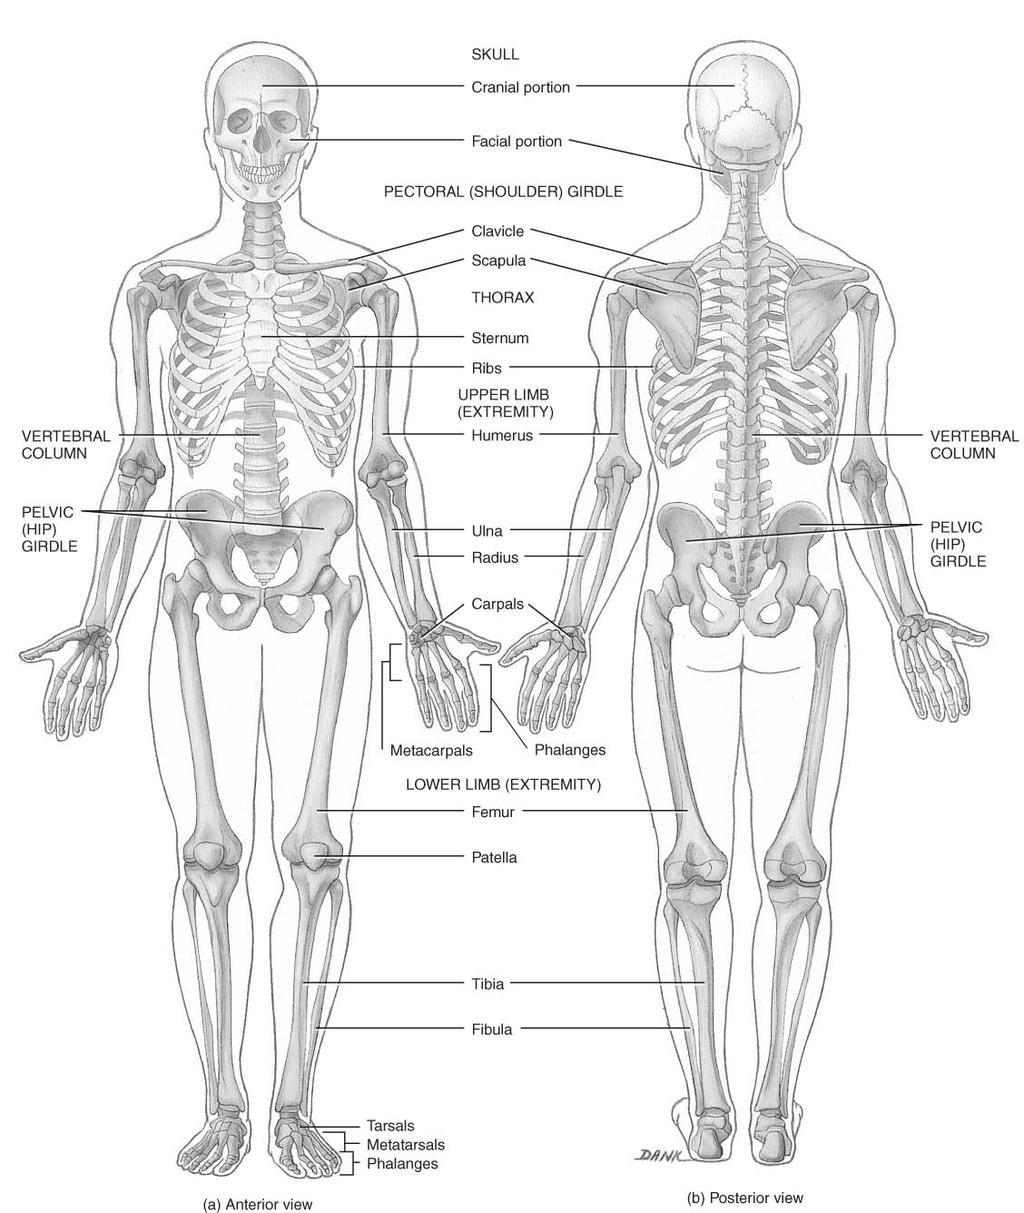 Chapter 8A The Skeletal System: The Axial Skeleton The Skeletal System: The Axial Skeleton 206 named bones Axial Skeleton 80 bones lie along longitudinal axis skull, hyoid, vertebrae, ribs, sternum,